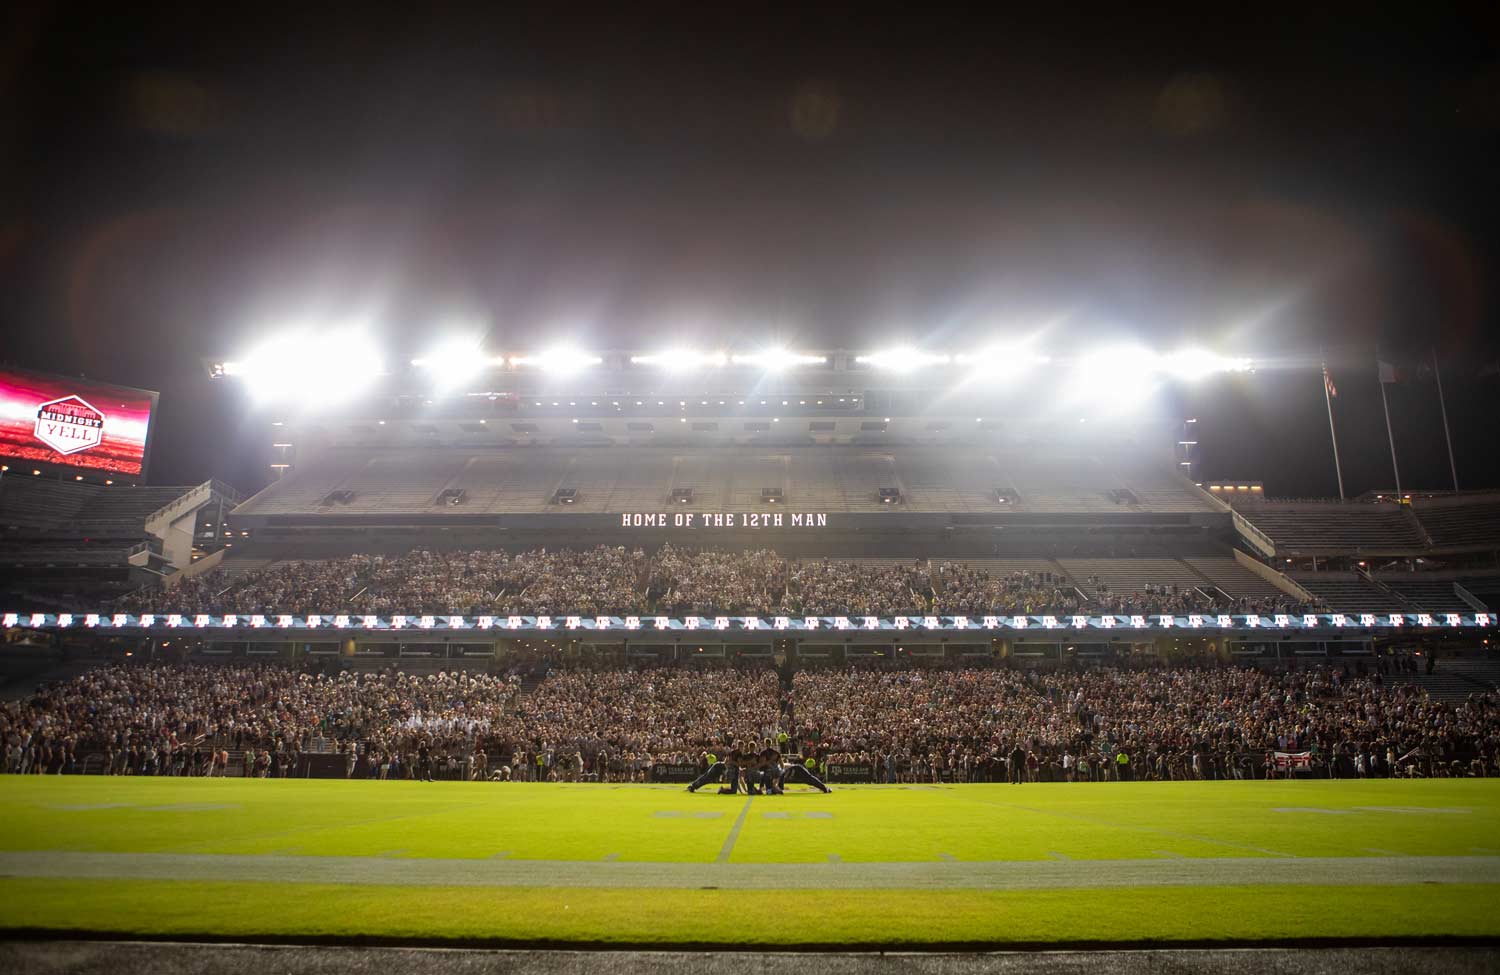 Yell leaders kneeling on Kyle Field in front of a crowded Kyle Field at Midnight Yell.